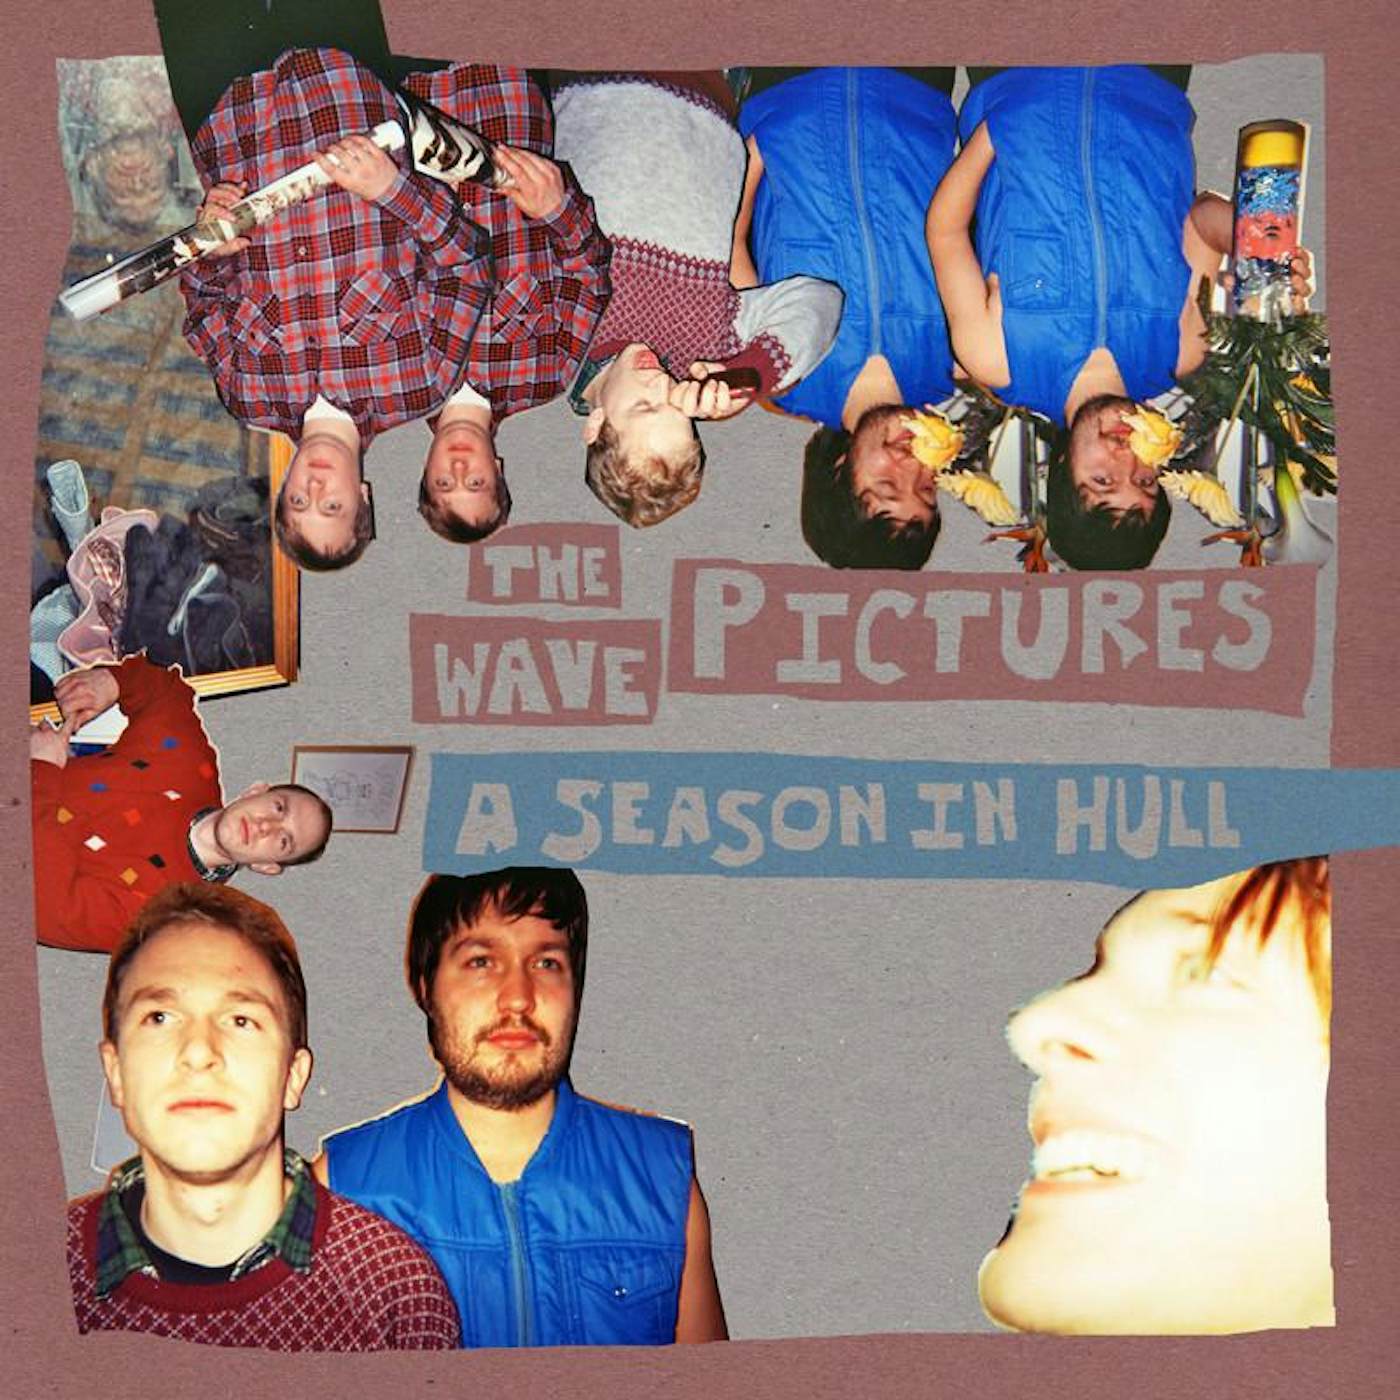 The Wave Pictures 'A Season In Hull' Vinyl LP Vinyl Record